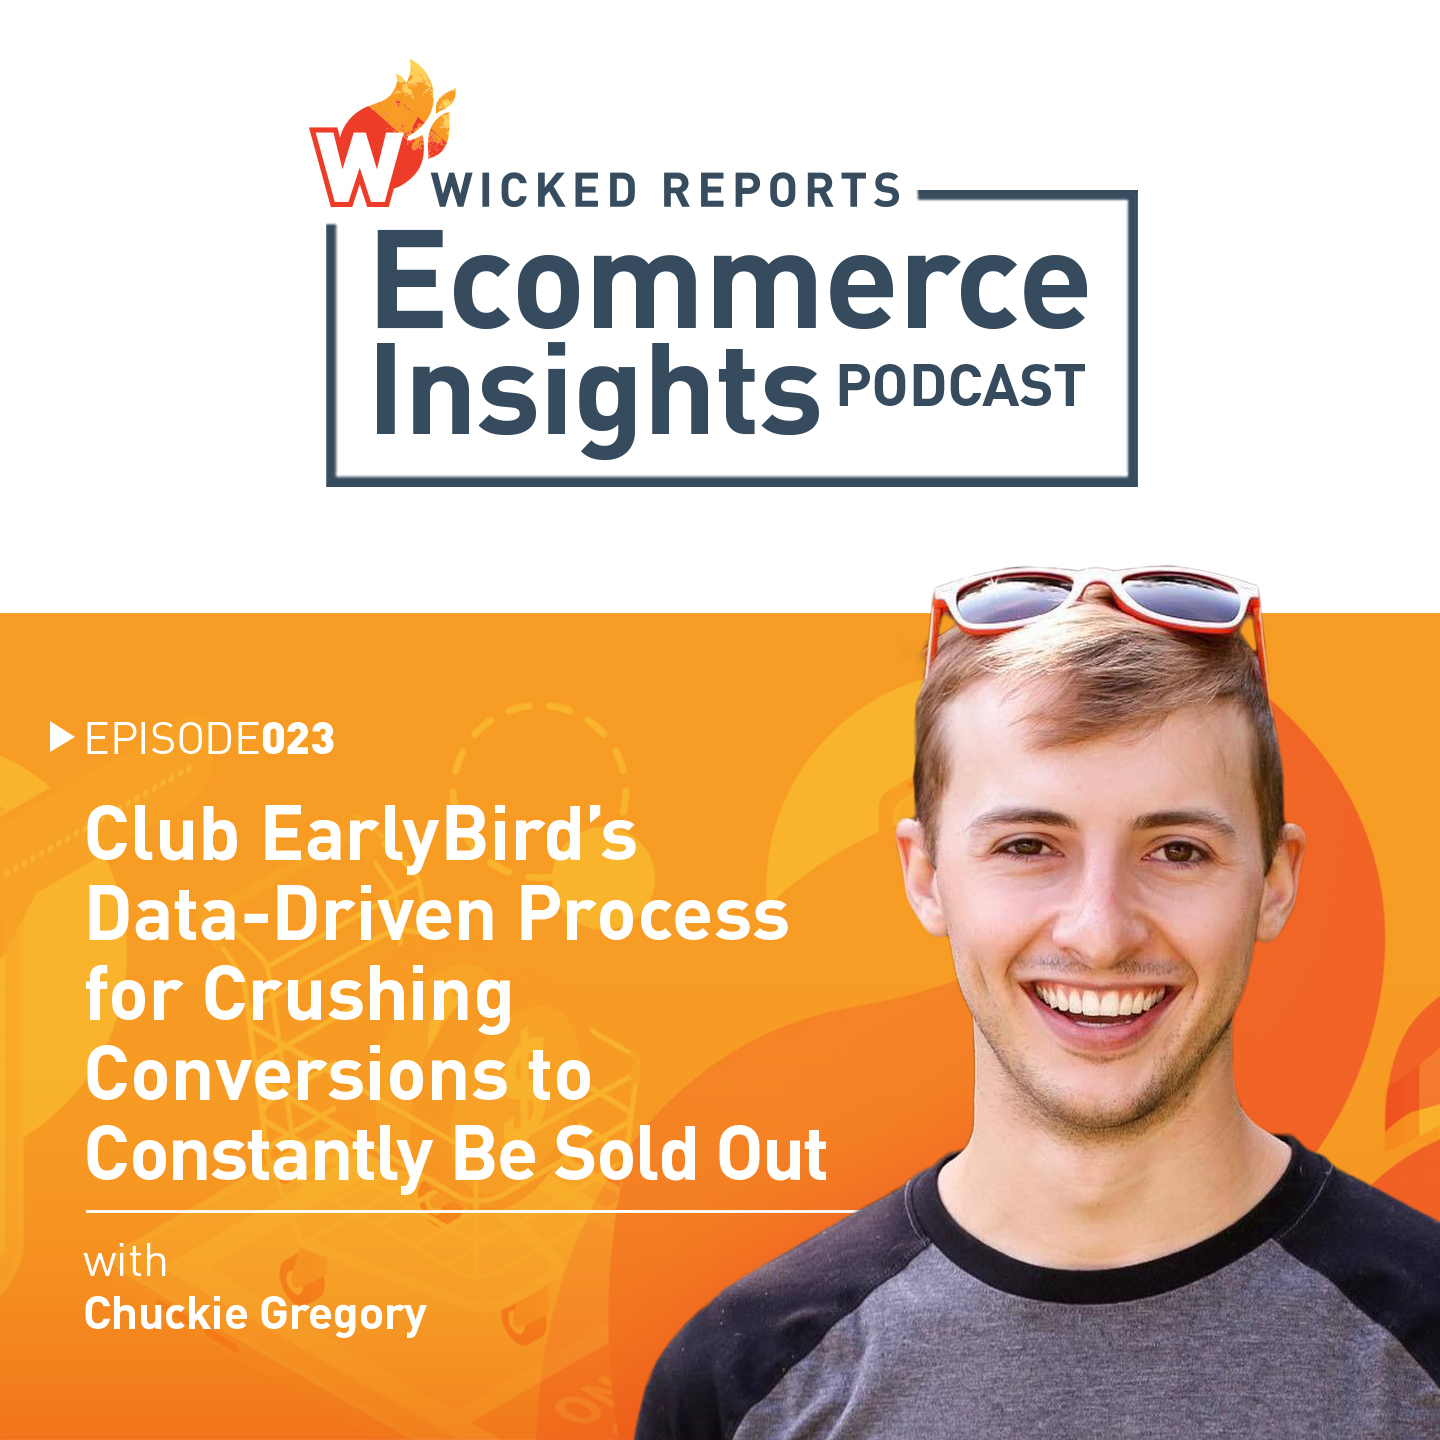 Club EarlyBird’s Data-Driven Process for Crushing Conversions to Constantly Be Sold Out